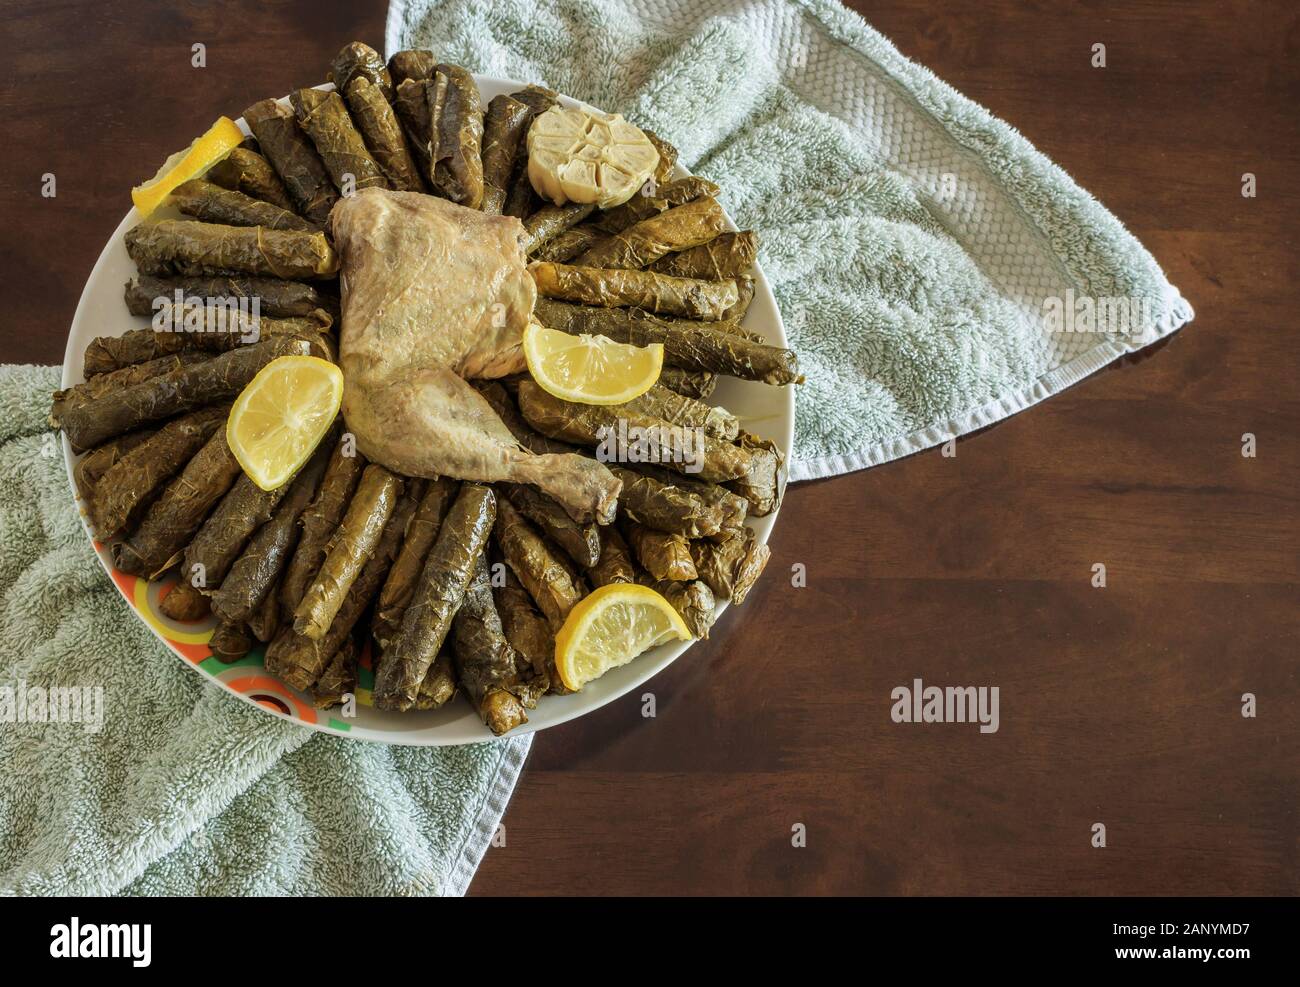 Overhead shot of a traditional Arabian meal with chicken meat served with lemons Stock Photo